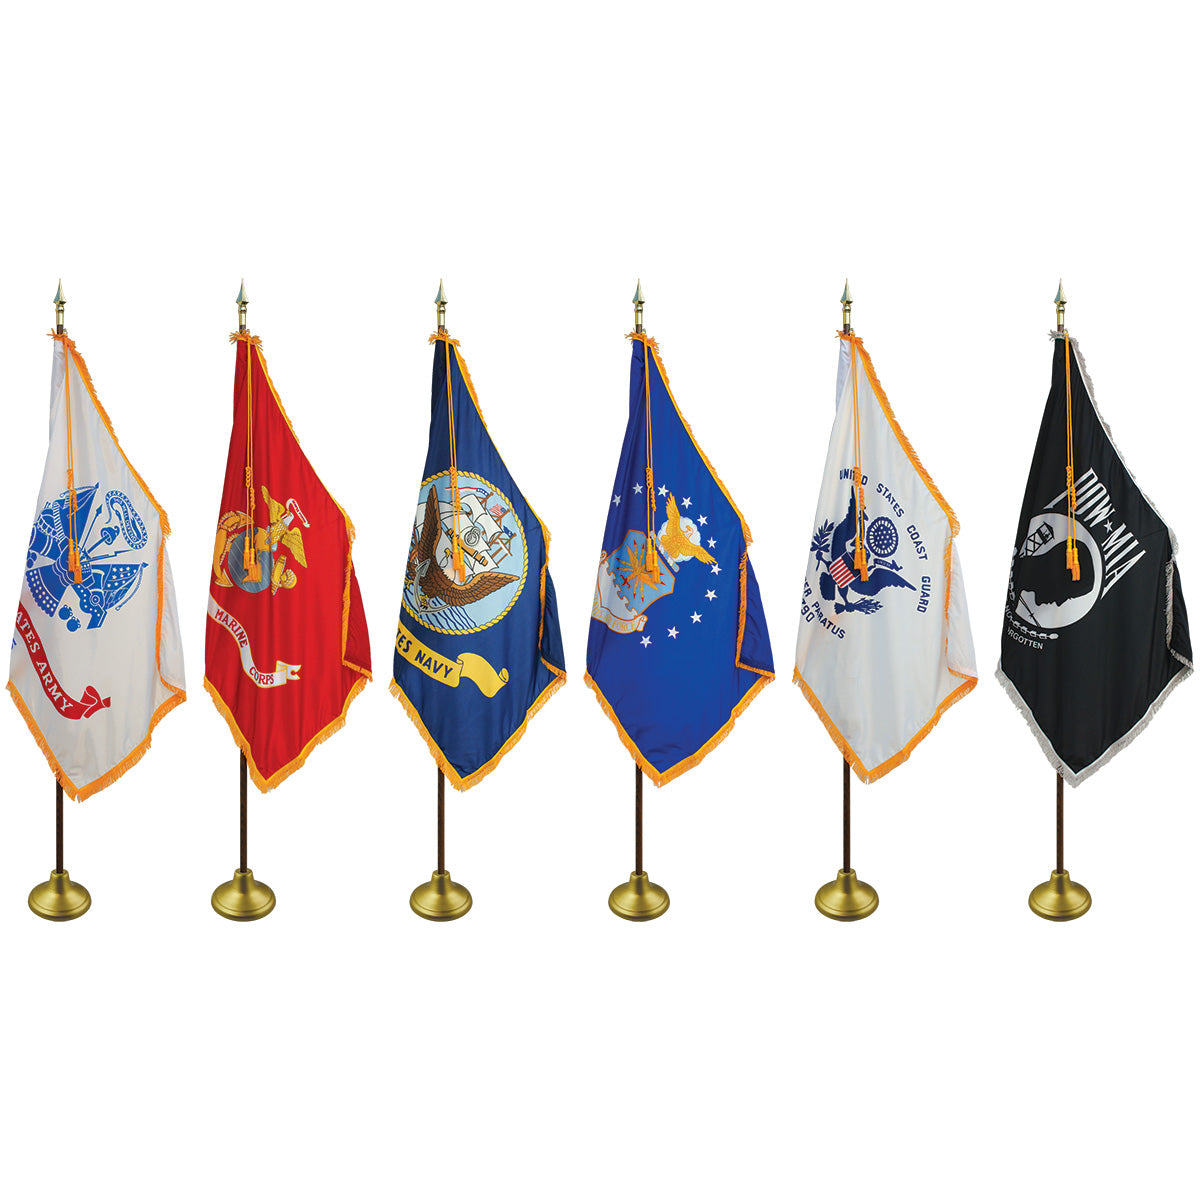 Armed-Forces-Flags-Army-Navy-Air-Force-Marines-Coast-Guard-POW/MIA-Flagsource-Southeast-Woodstock, GA